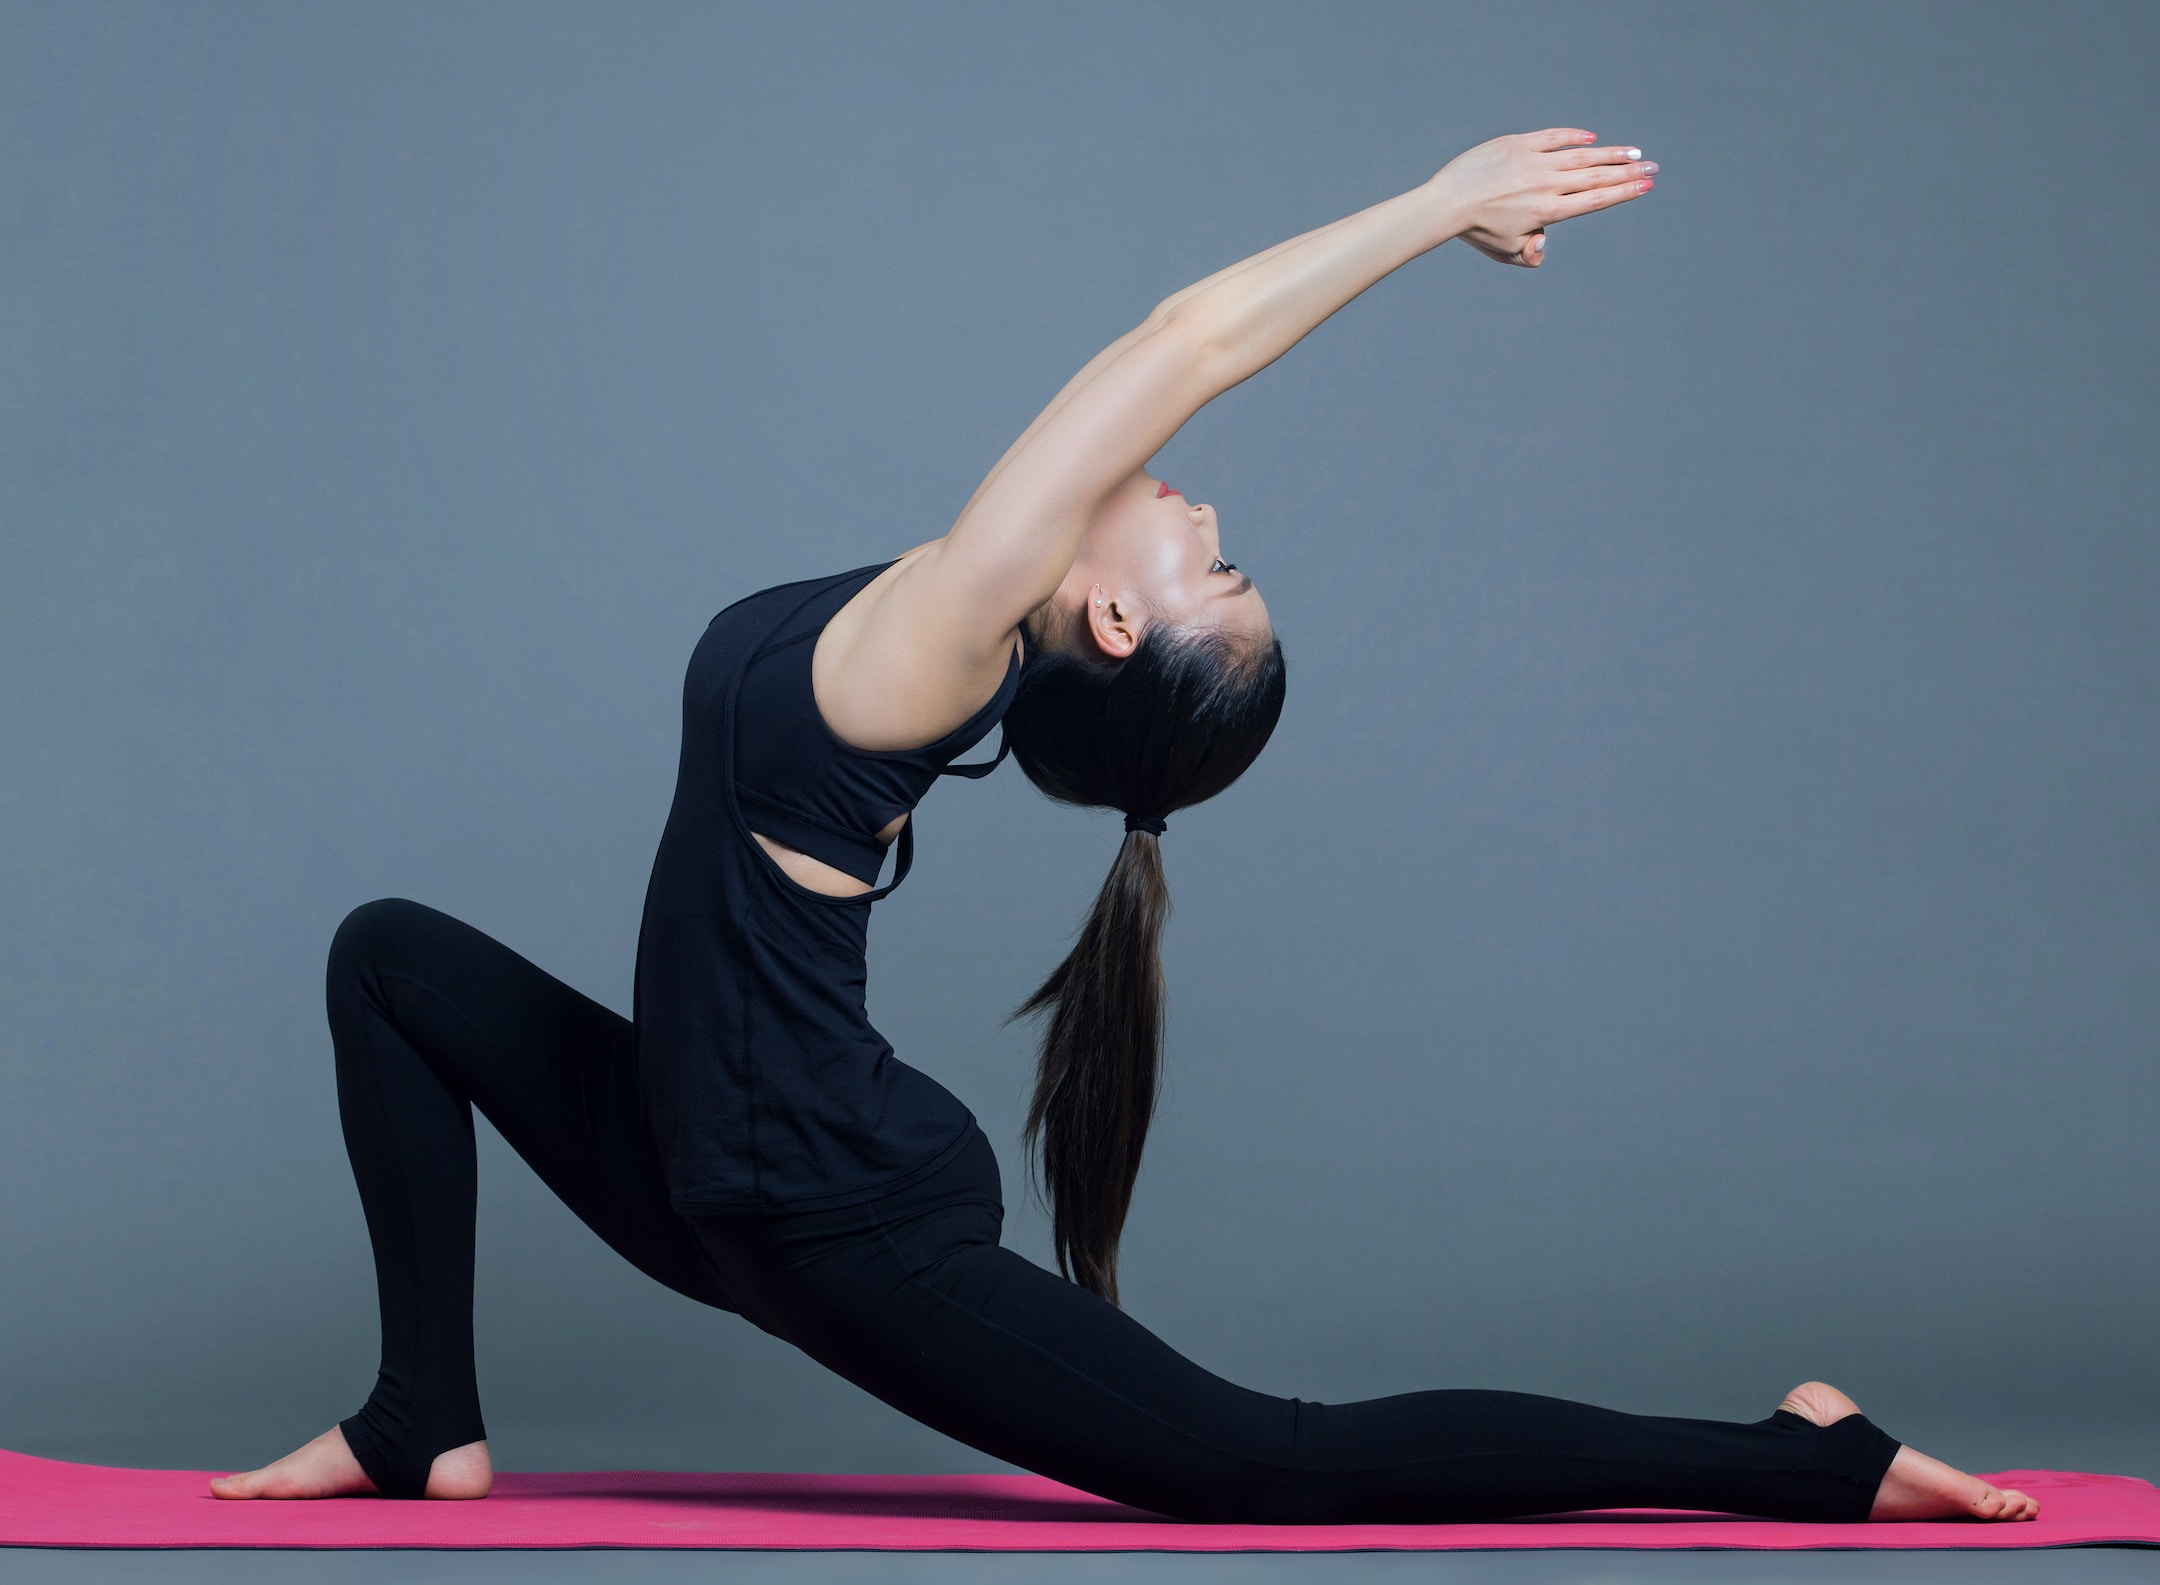 Discover Effective 7 Yoga Poses to Trim Your Belly Fast!